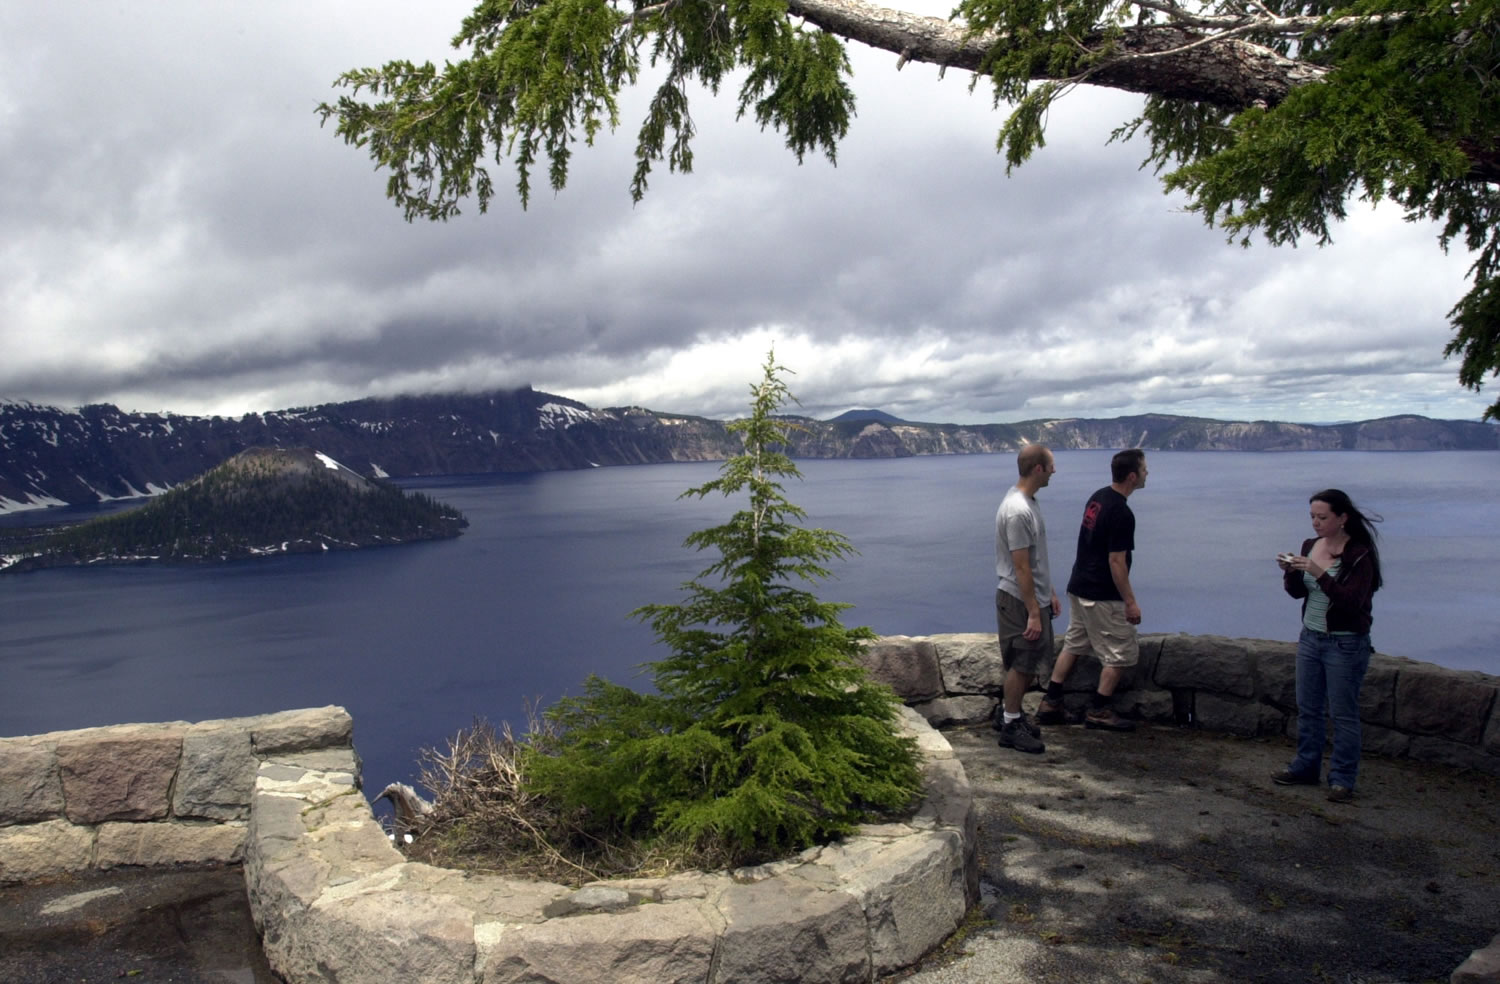 This June 16, 2006 file photo shows tourists taking in the view at Crater Lake National Park, Ore.